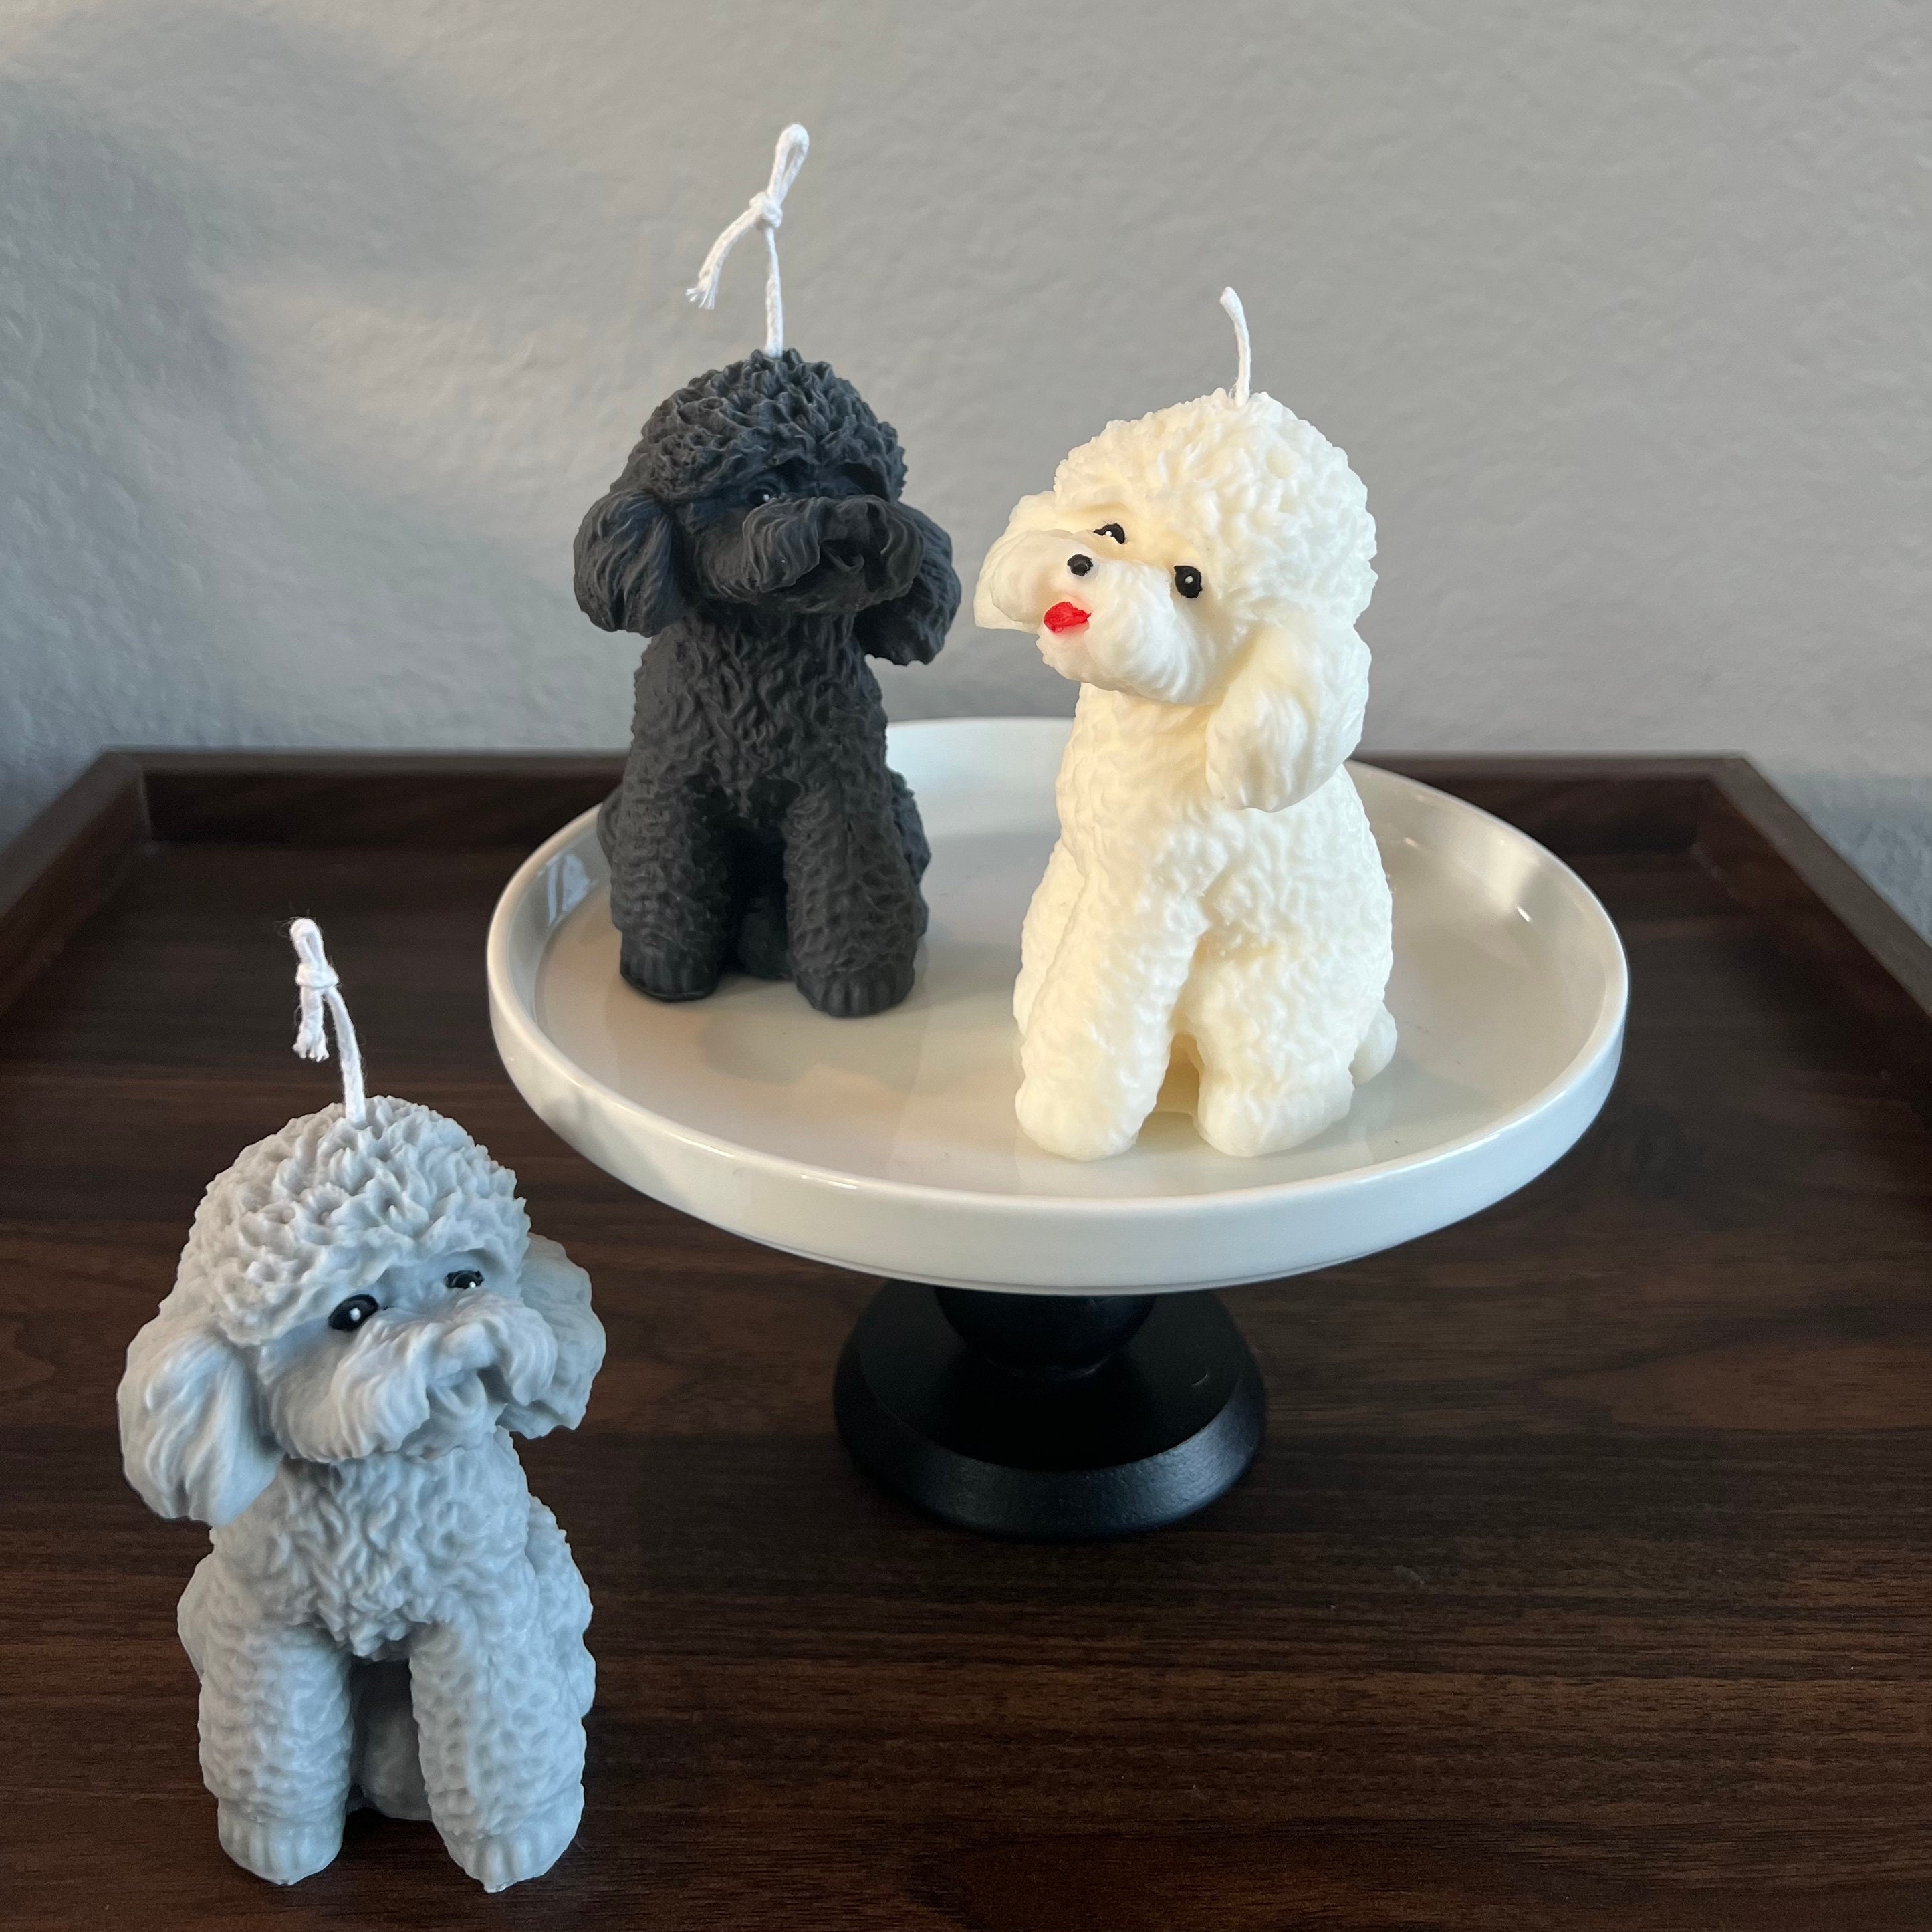 Ymar Candles - French poodle mini toy disponibles color